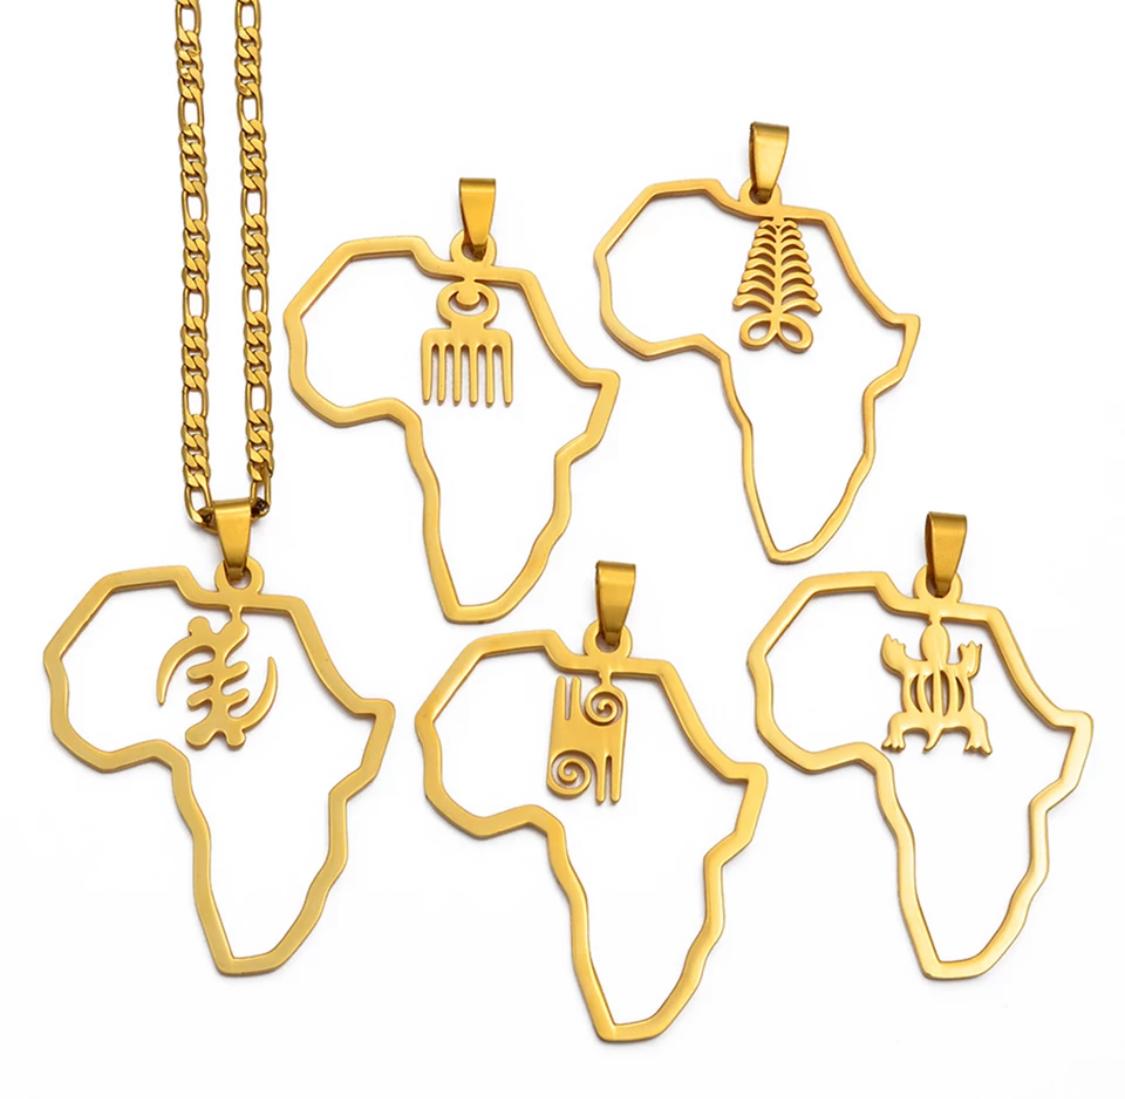 Comb African Symbol Pendant Necklaces For Men and women.